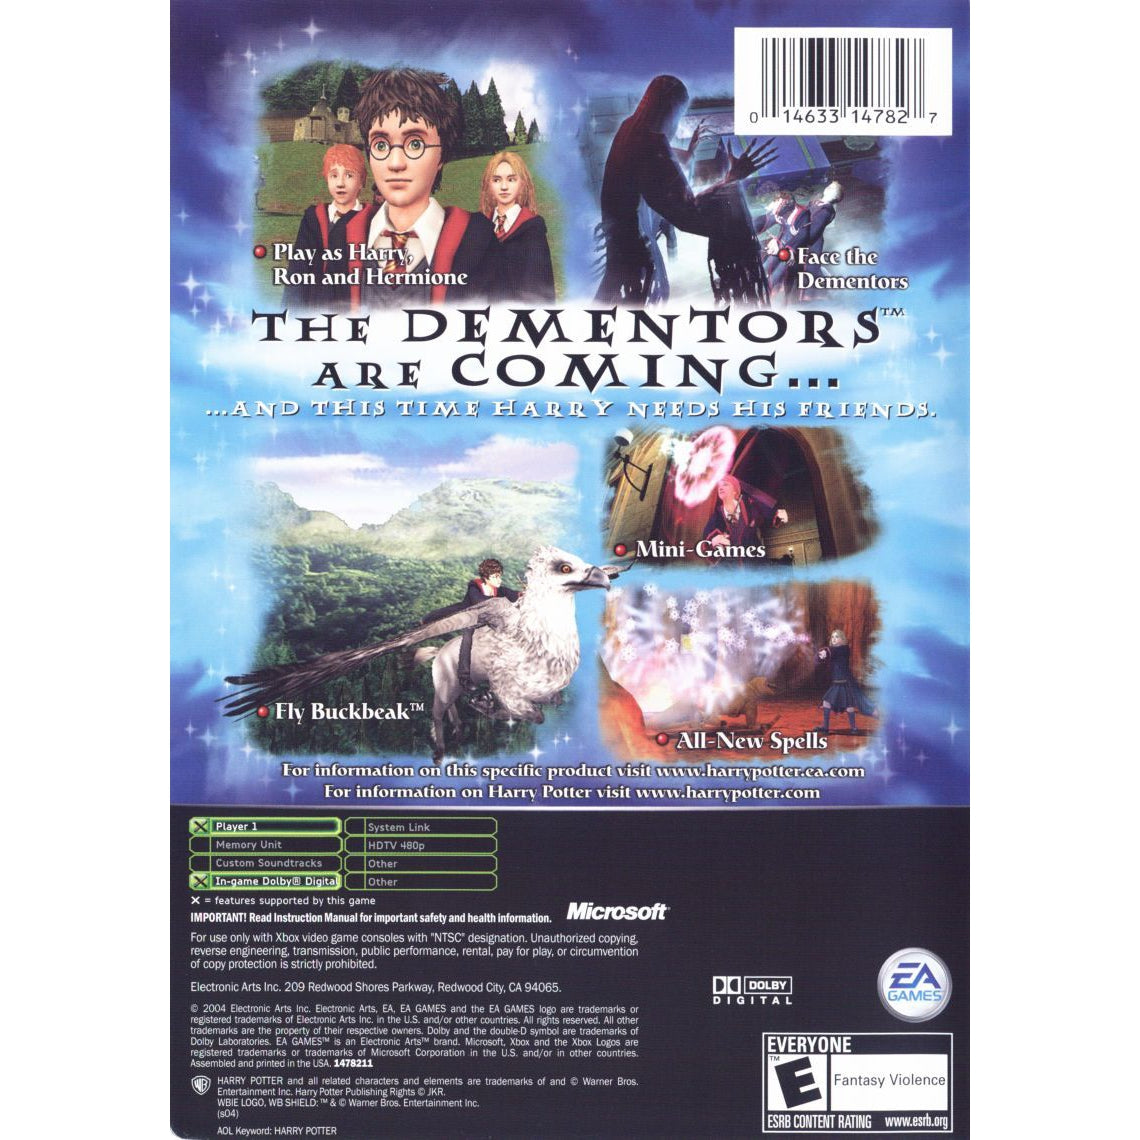 Harry Potter and the prisoner of Azkaban - Microsoft Xbox Game Complete - YourGamingShop.com - Buy, Sell, Trade Video Games Online. 120 Day Warranty. Satisfaction Guaranteed.